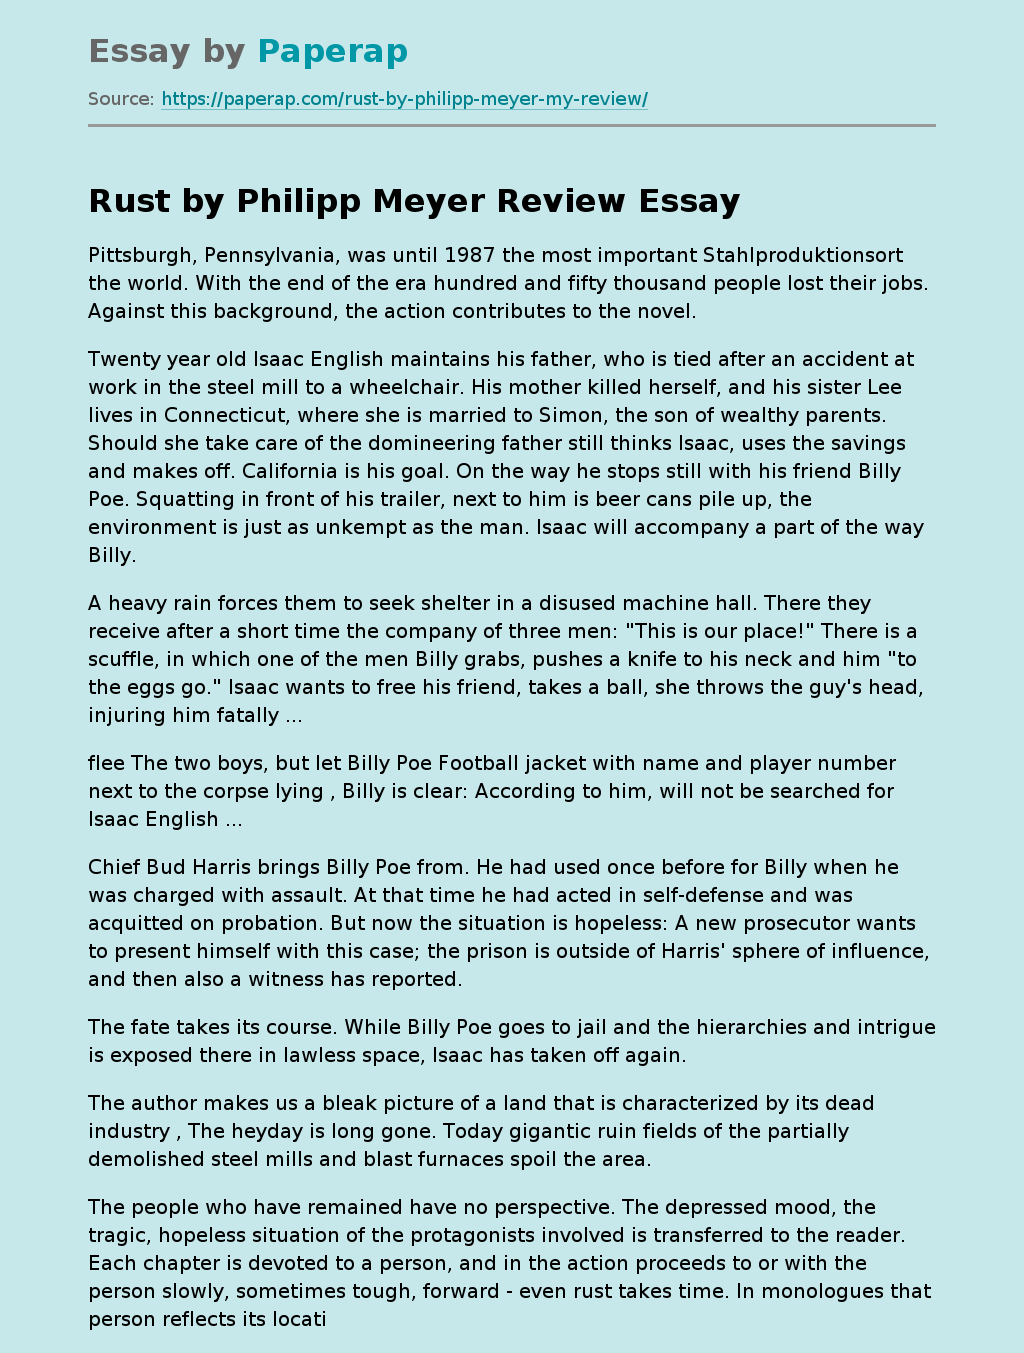 Rust by Philipp Meyer Review